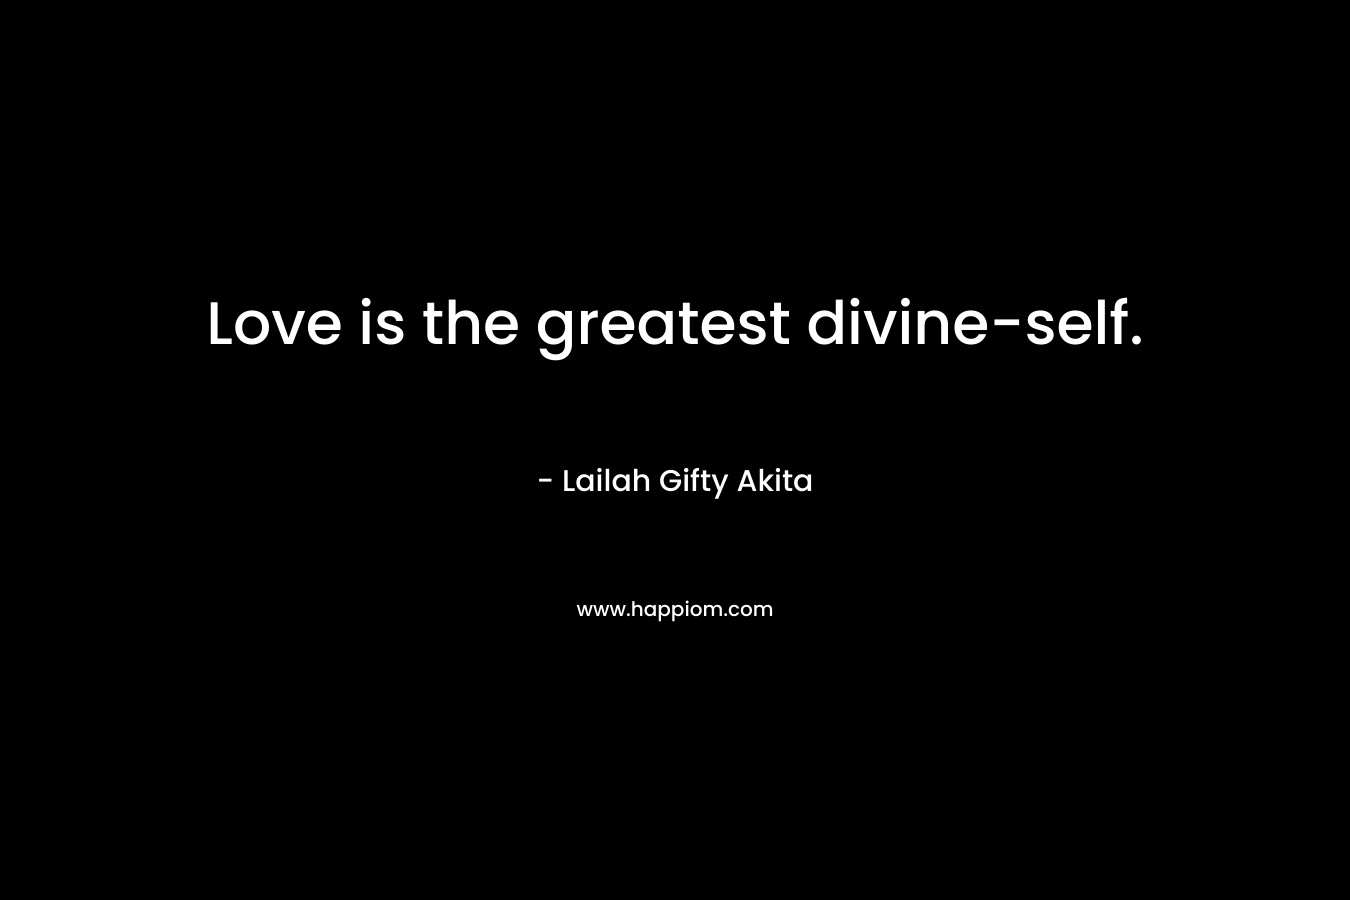 Love is the greatest divine-self.